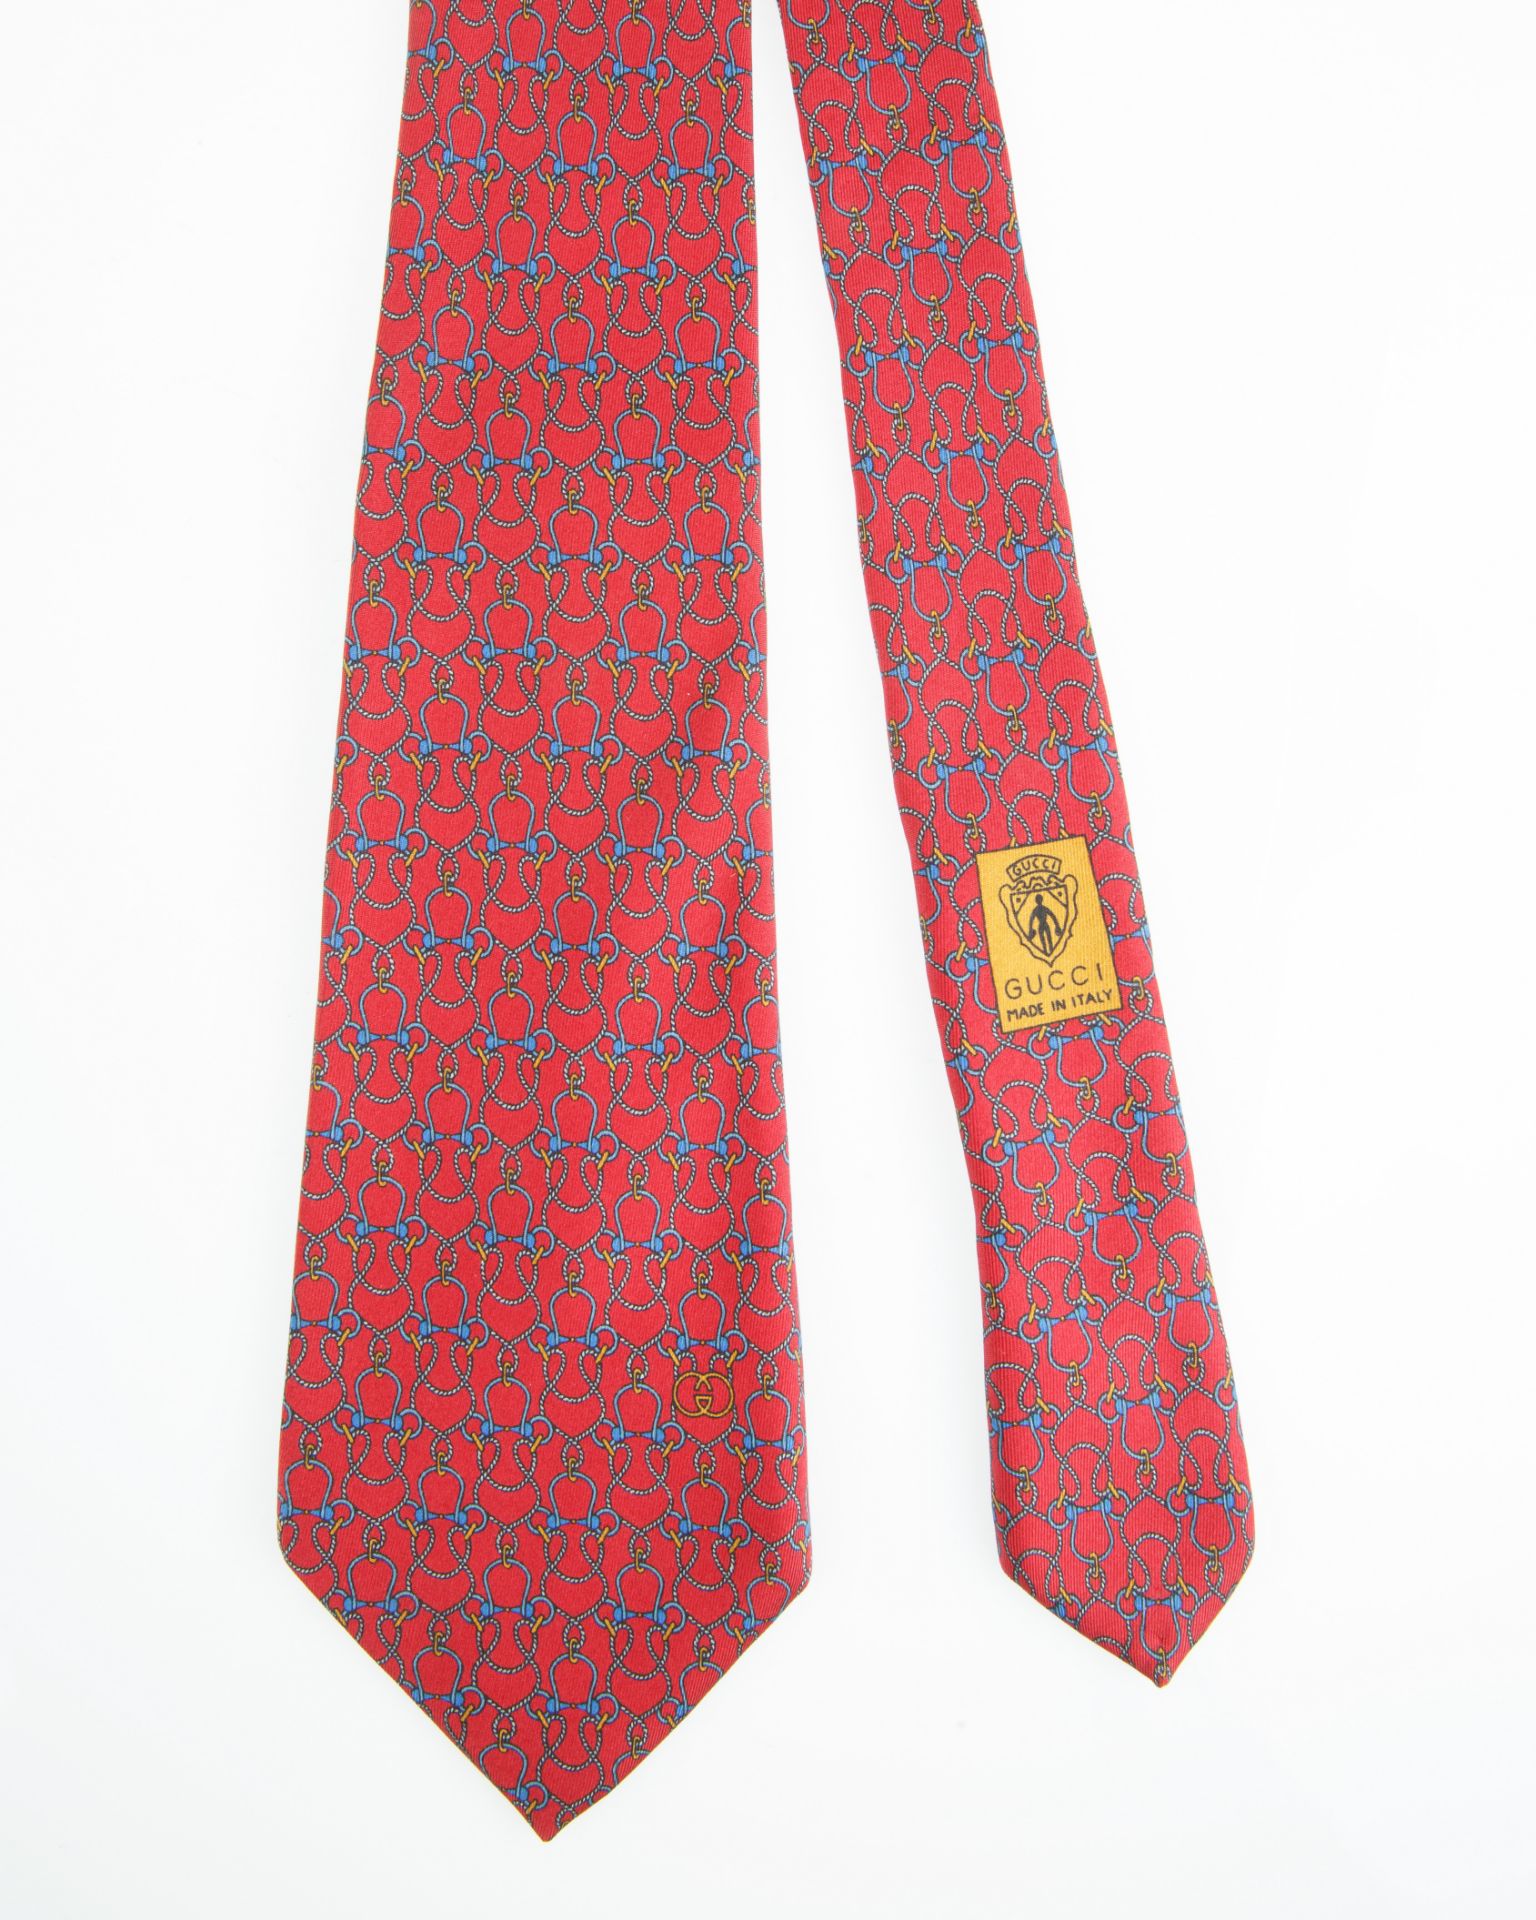 GROUP OF SEVEN GUCCI TIES - Image 12 of 15